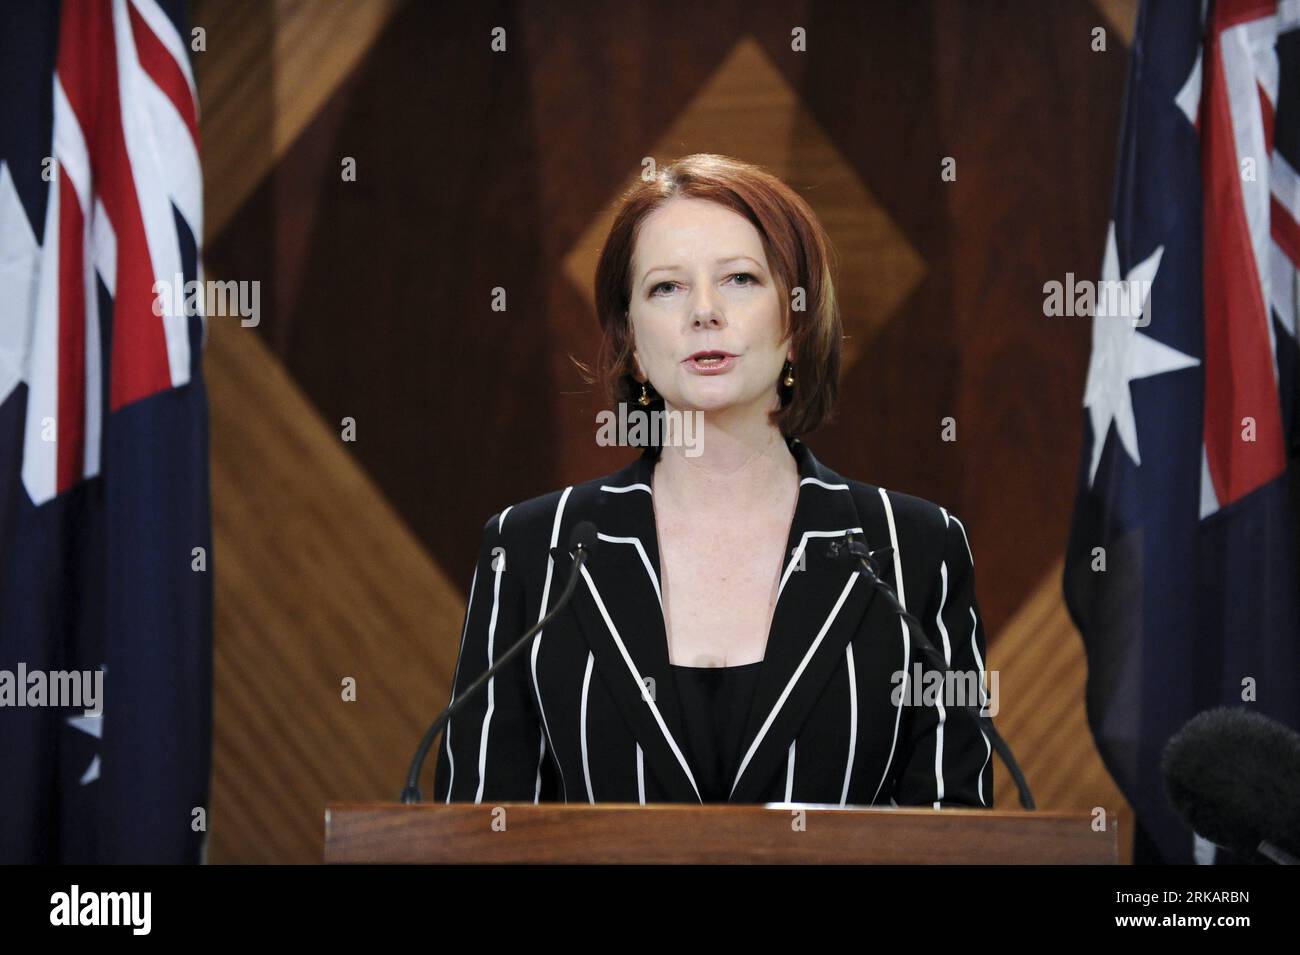 Bildnummer: 54418595  Datum: 11.09.2010  Copyright: imago/Xinhua (100911) -- MELBOURNE, Sep. 11, 2010 (Xinhua) -- Australian Prime Minister Julia Gillard announces her new cabinet for the Labor Government in next term in the Commonwealth Office in Melbourne, Australia, Sep 11, 2010. Gillard confirmed that former Prime Minister Kevin Rudd would be given the Foreign Affairs portfolio. (Xinhua/Bai Xue) (yc) AUSTRALIA-PRIME MINISTER-NEW CABINET PUBLICATIONxNOTxINxCHN People Politik kbdig xmk 2010 quer     Bildnummer 54418595 Date 11 09 2010 Copyright Imago XINHUA  Melbourne Sep 11 2010 XINHUA Aust Stock Photo